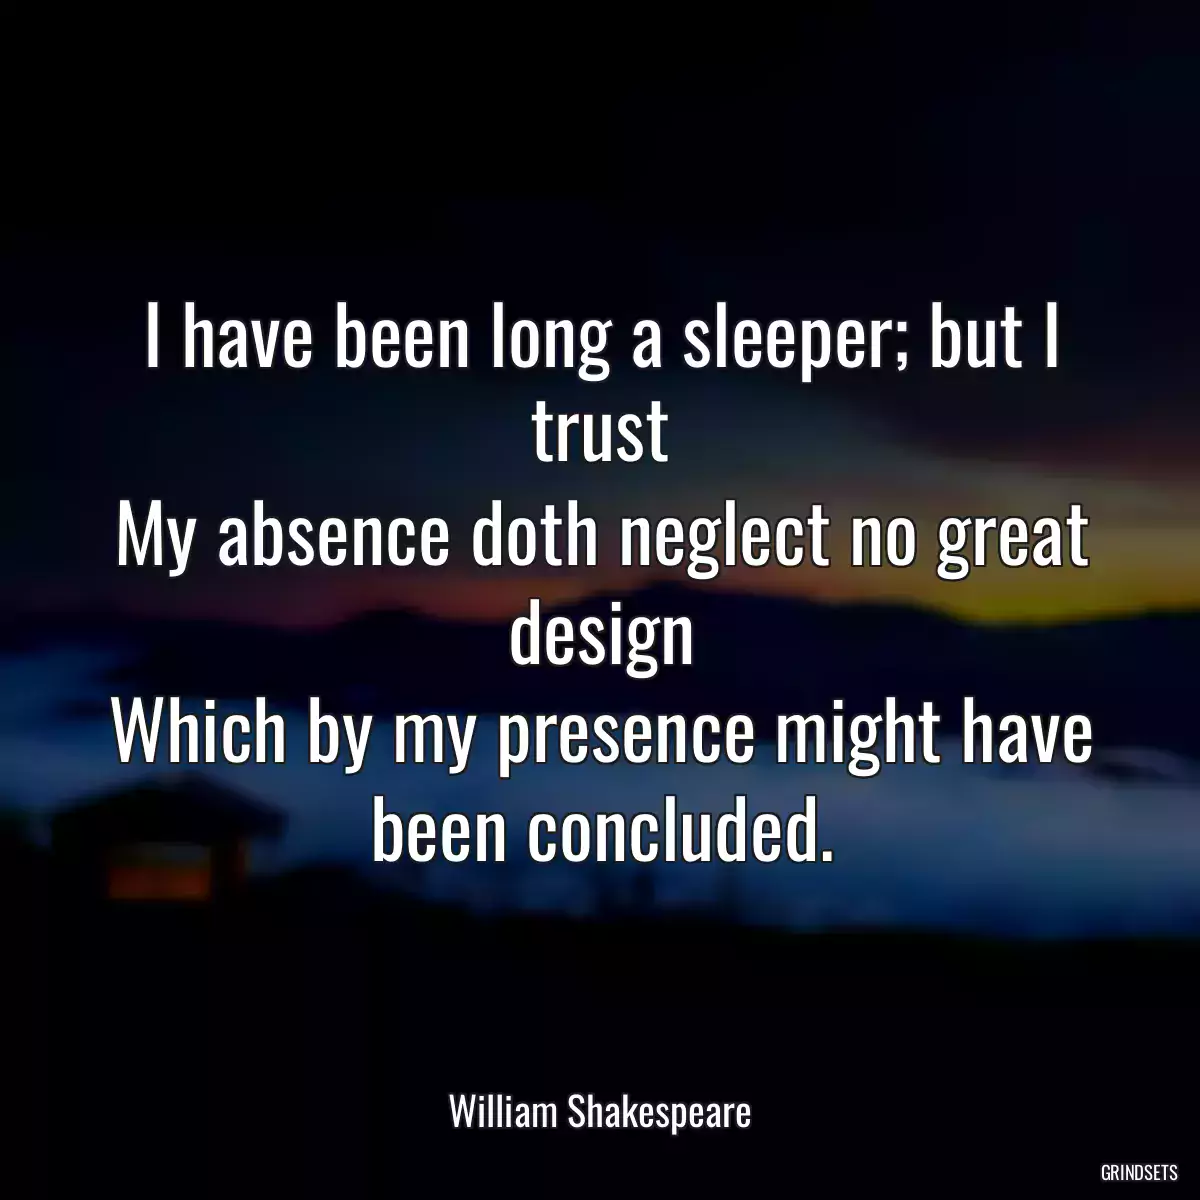 I have been long a sleeper; but I trust
My absence doth neglect no great design
Which by my presence might have been concluded.